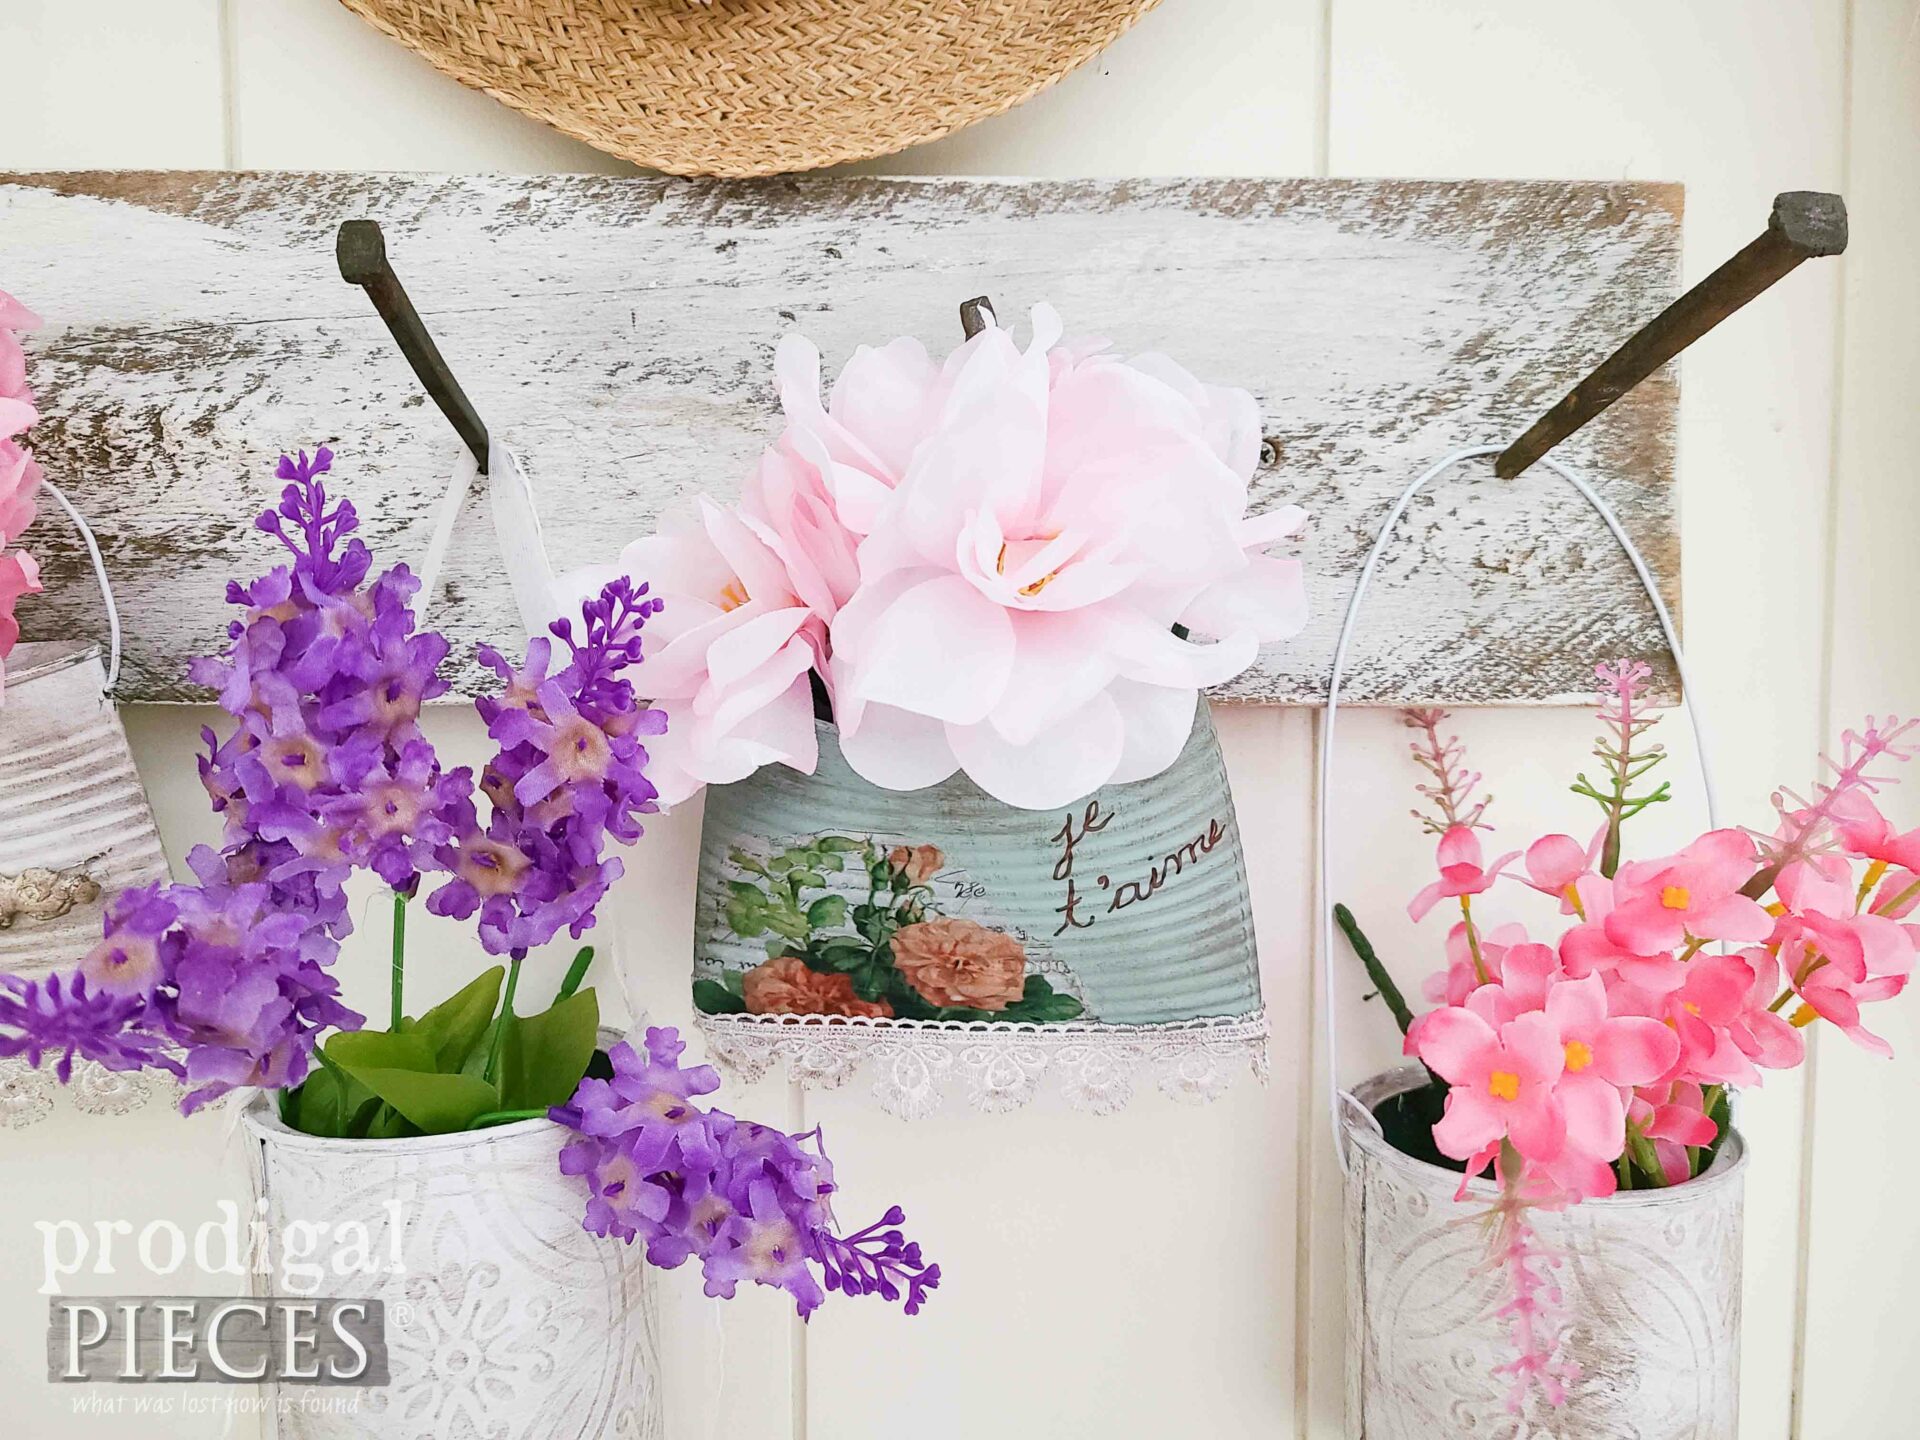 French Chic Spring Decor from Upcycled Tin Can by Larissa of Prodigal Pieces | prodigalpieces.com #prodigalpieces #spring #diy #crafts